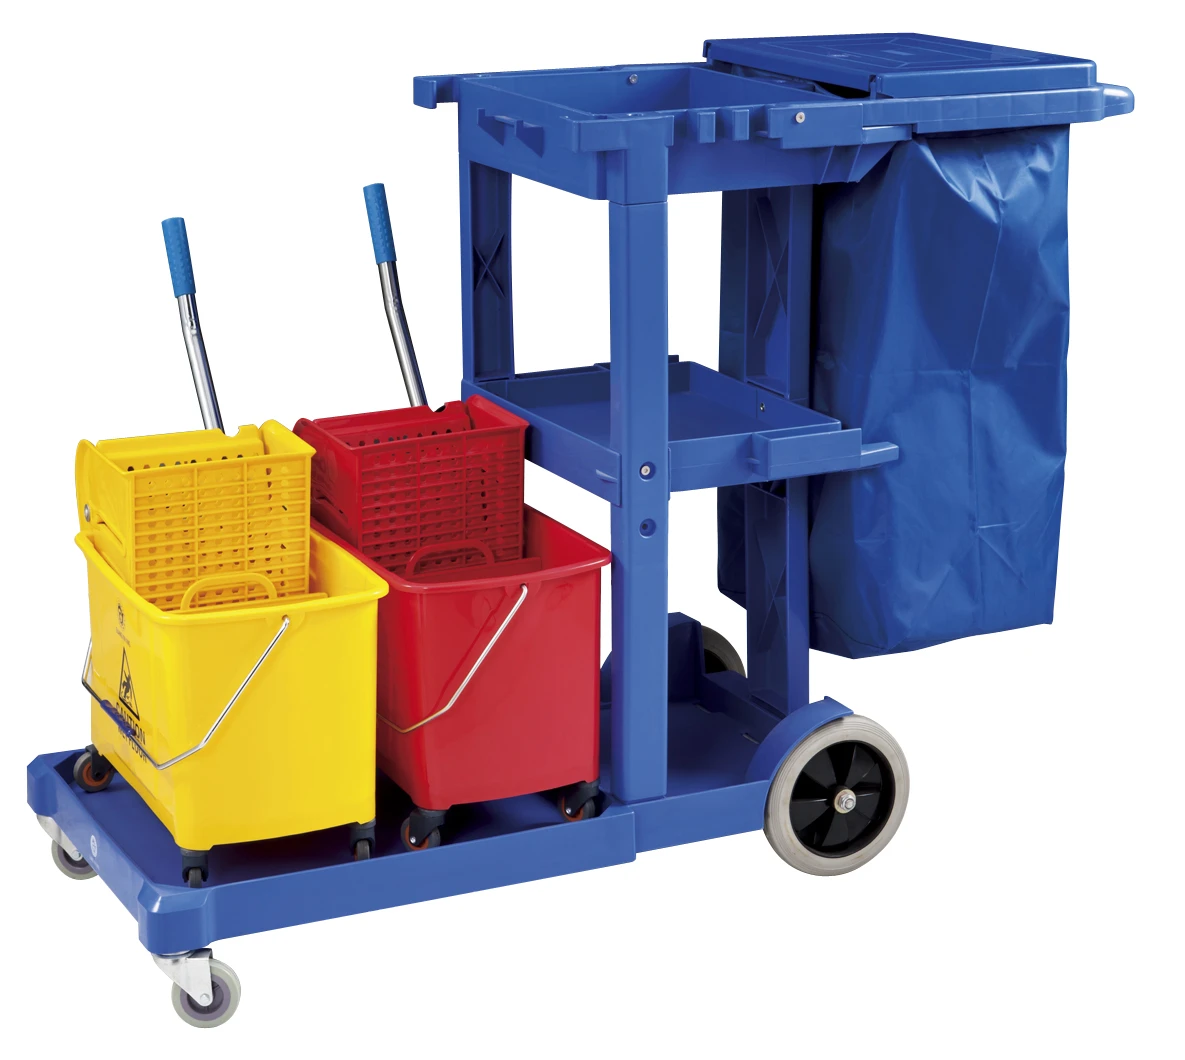 Commercial Industrial Hospital Hotel Plastic Janitorial Tools Janitor Cart Cleaning Trolley